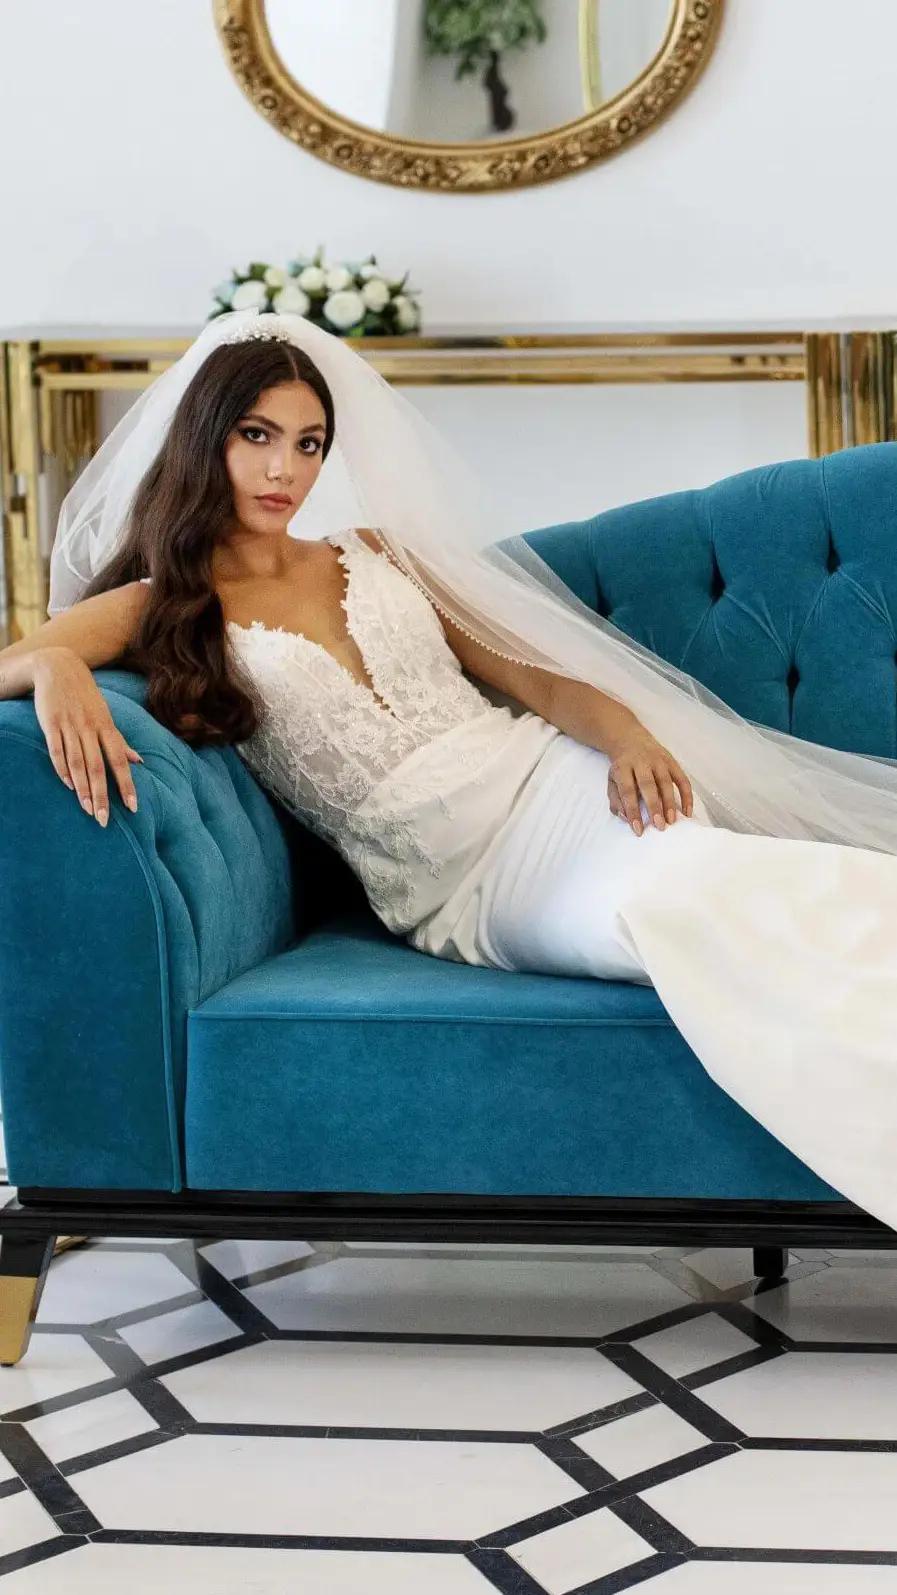 Many Bridal Stores Offer Free try-ons For Their Dresses Image